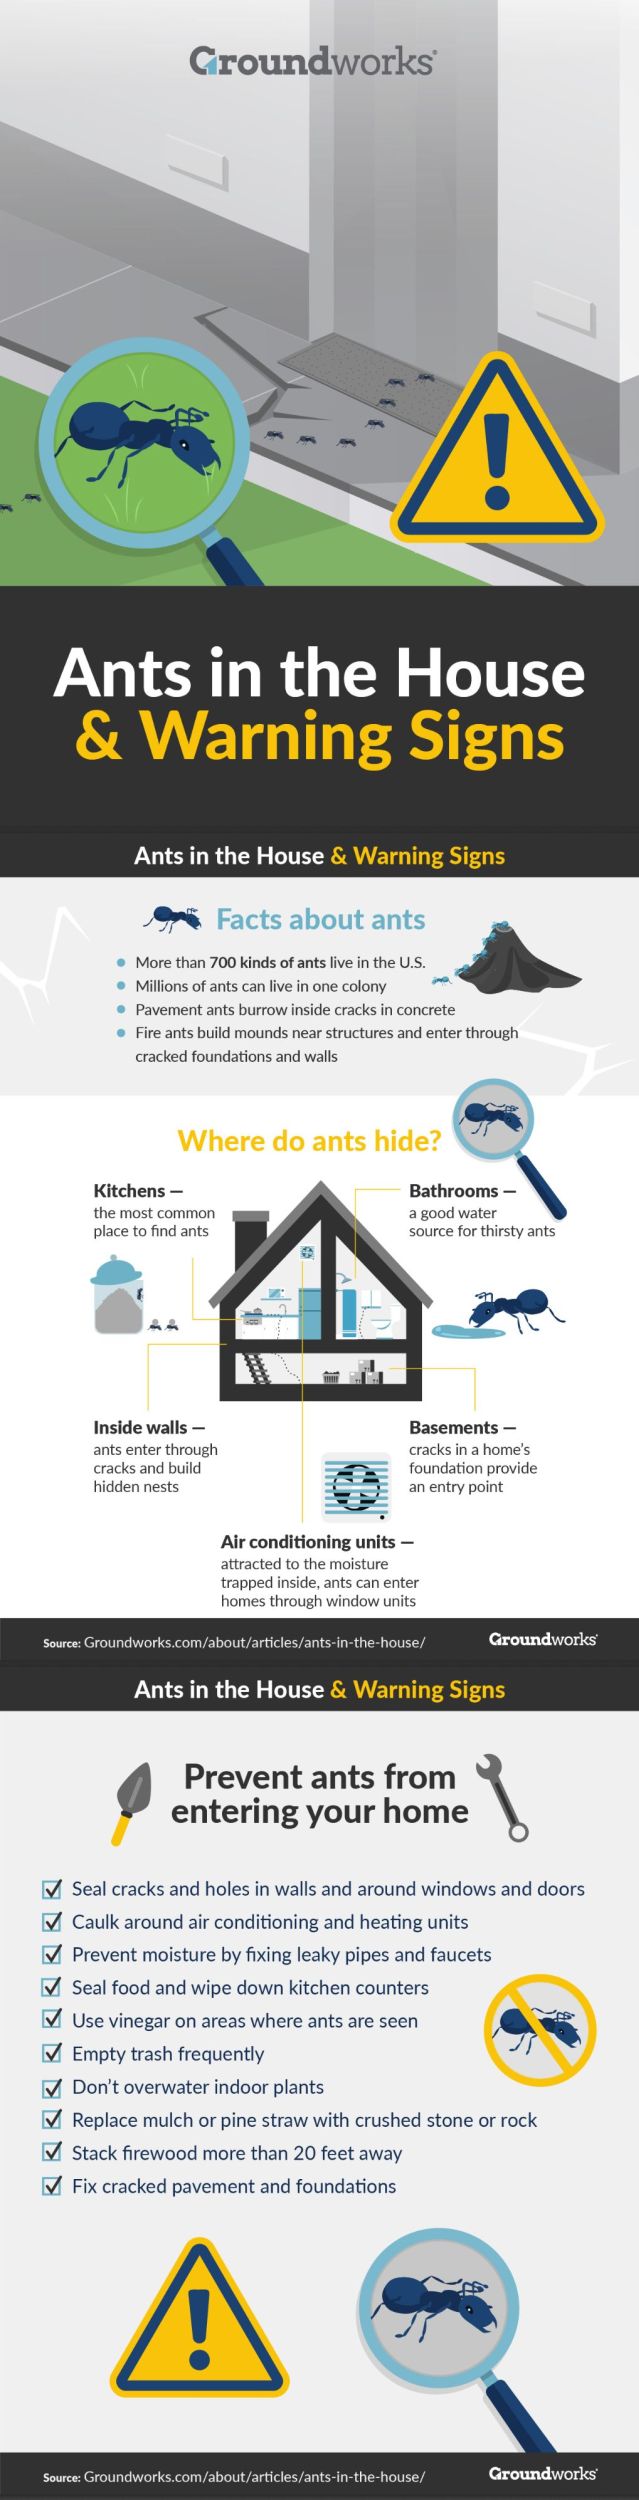 Ants in the House & Warning Signs